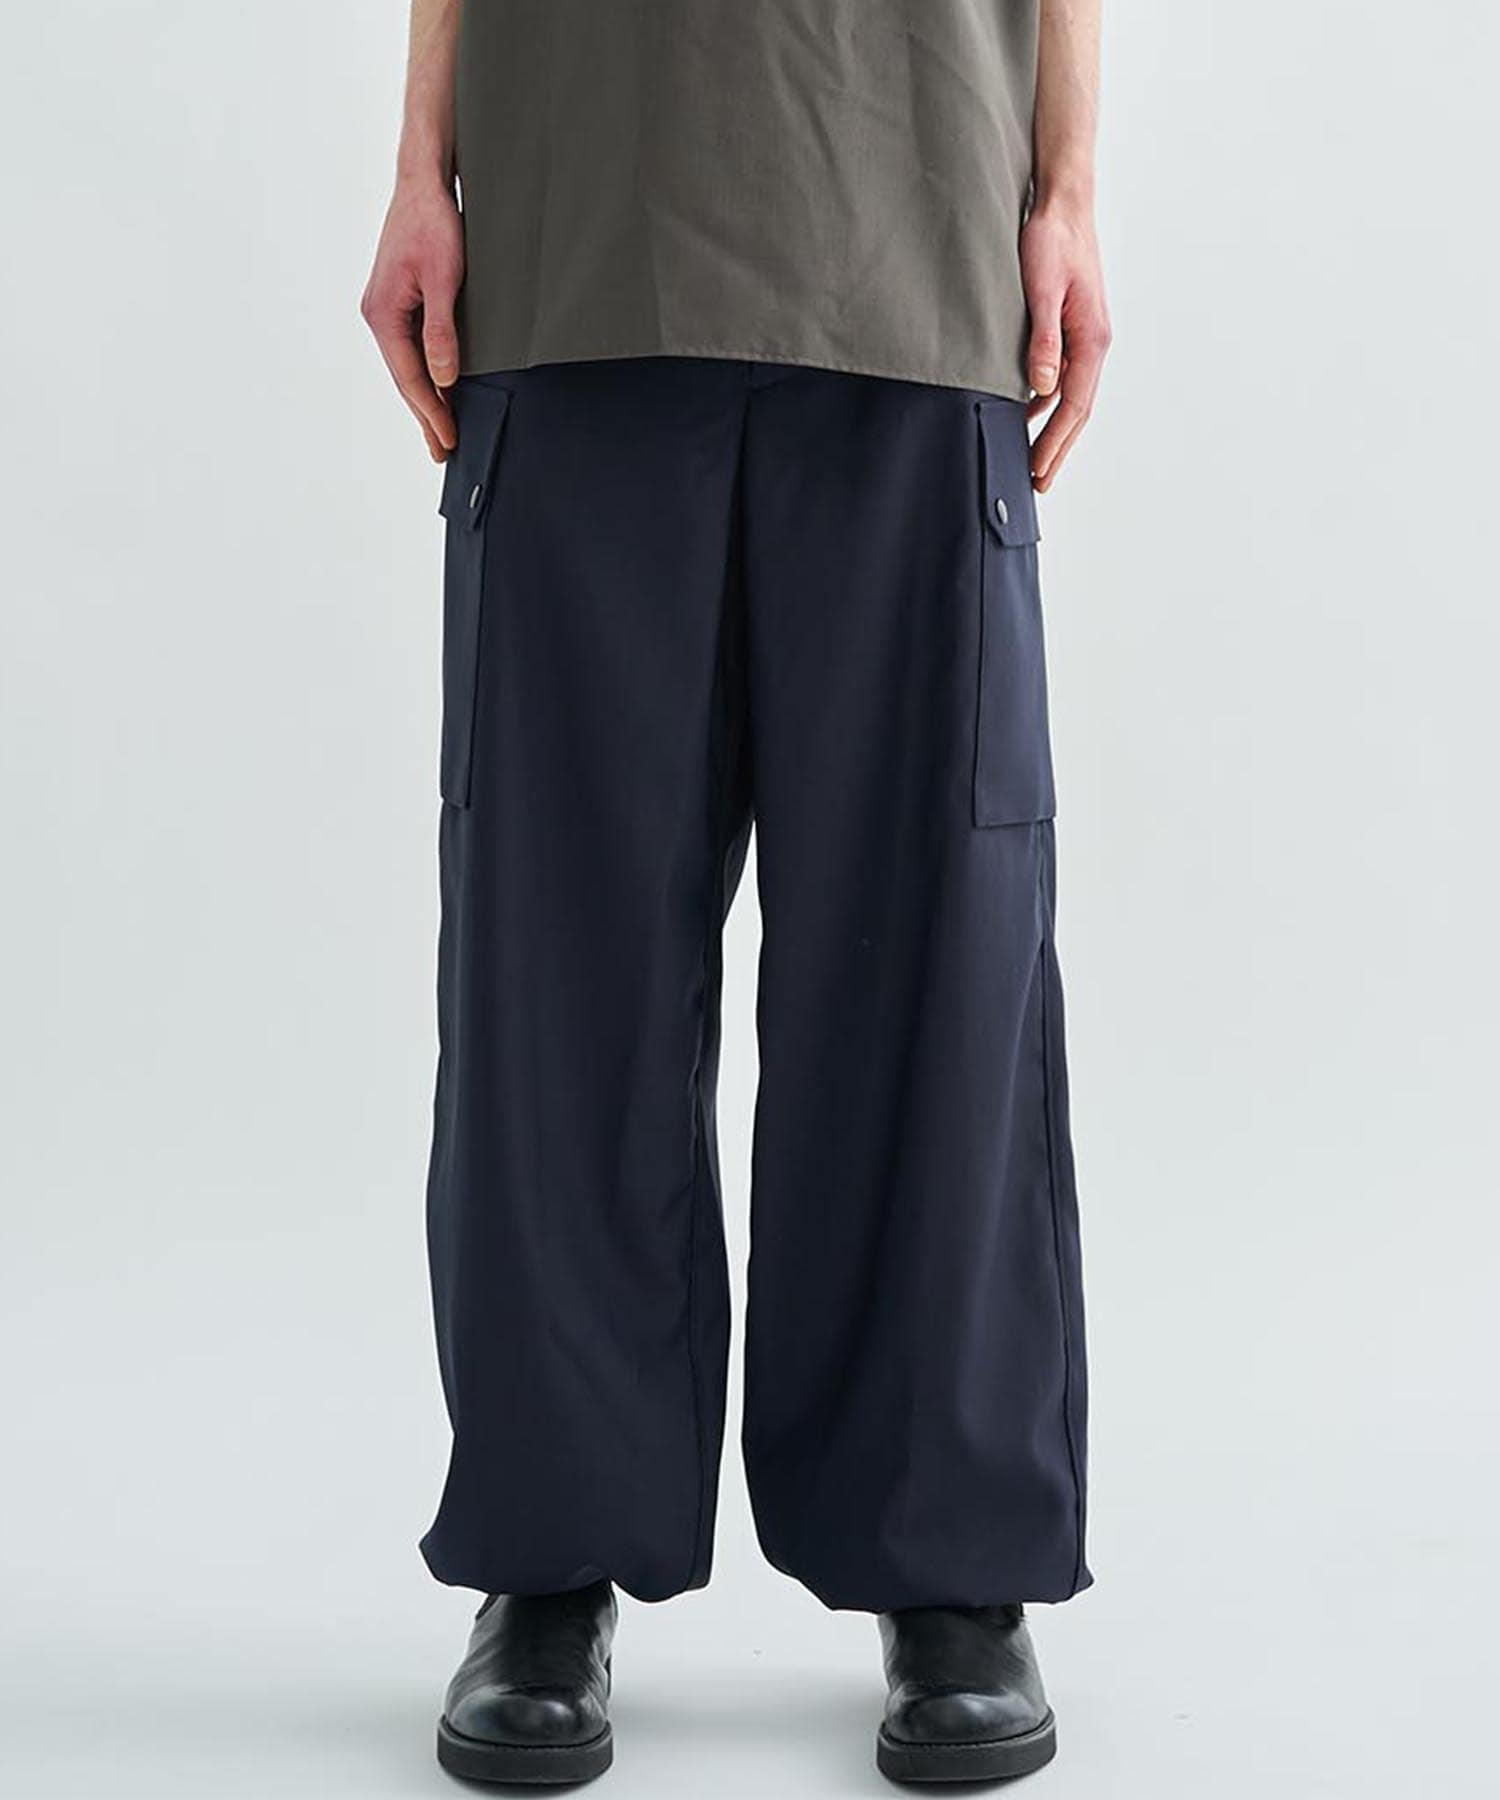 THE RERACS（ザ・リラクス）の「RERACS FRENCH ARMY F2 CARGO PANTS 